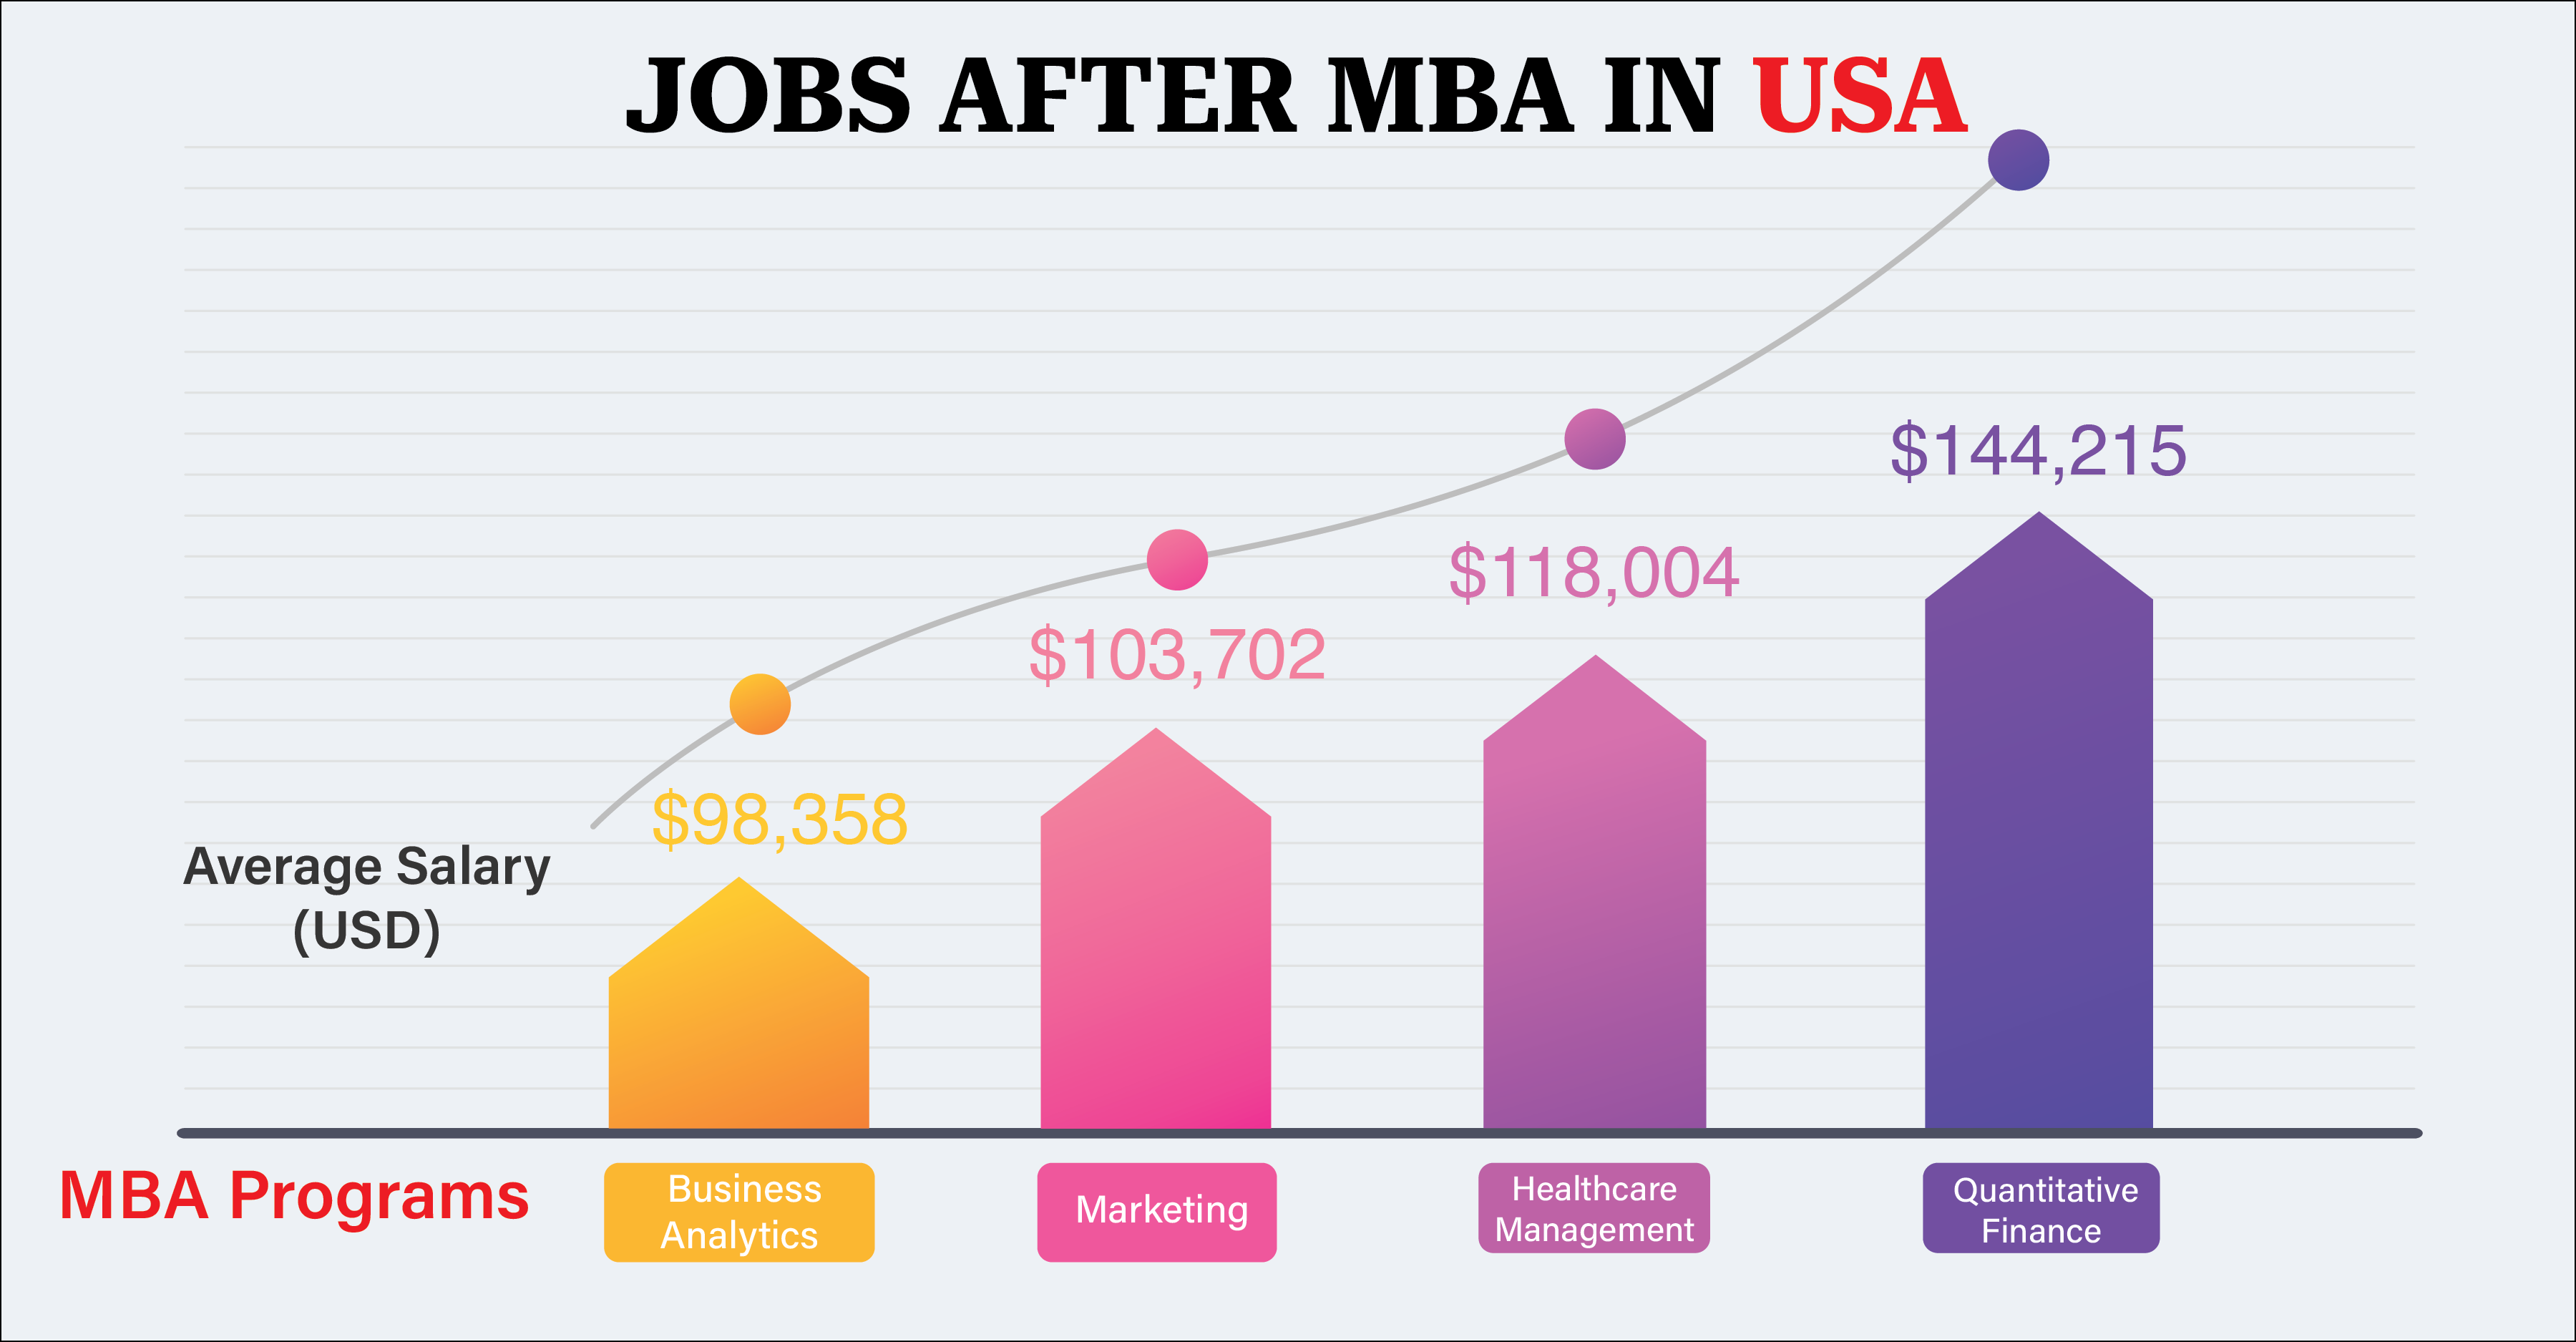 Here are the jobs after MBA in USA list by Gradding.com.